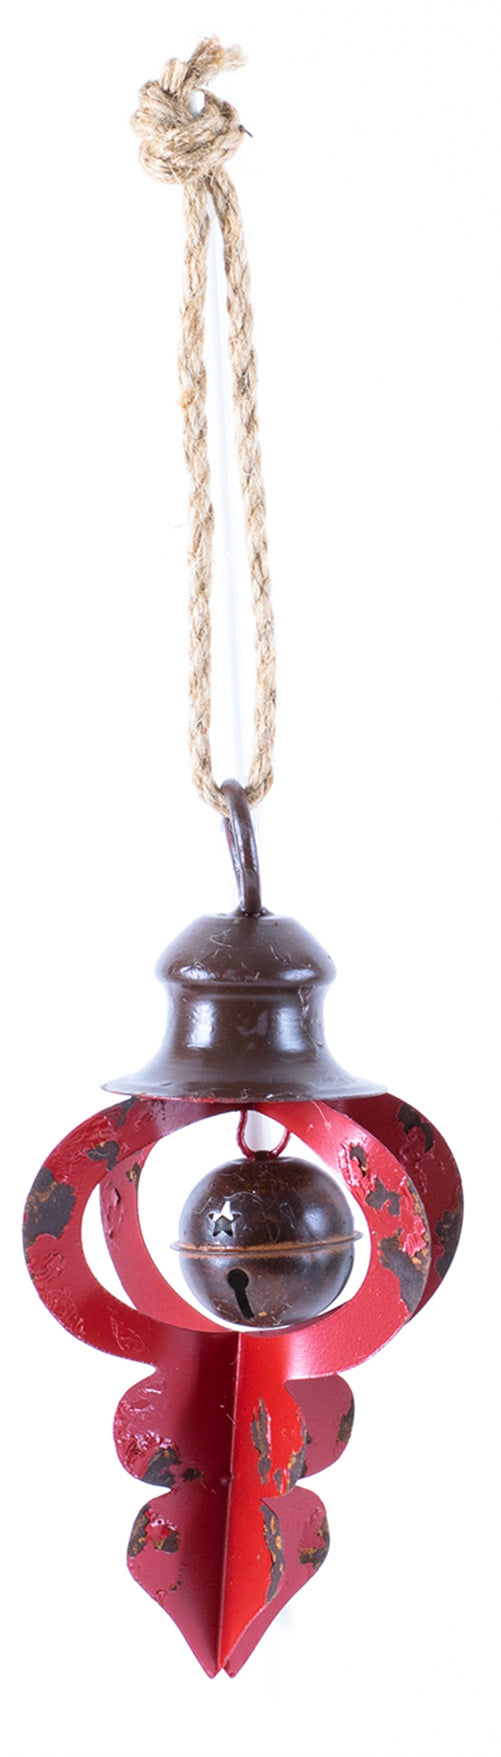 Distressed Metal Ornament With Bell